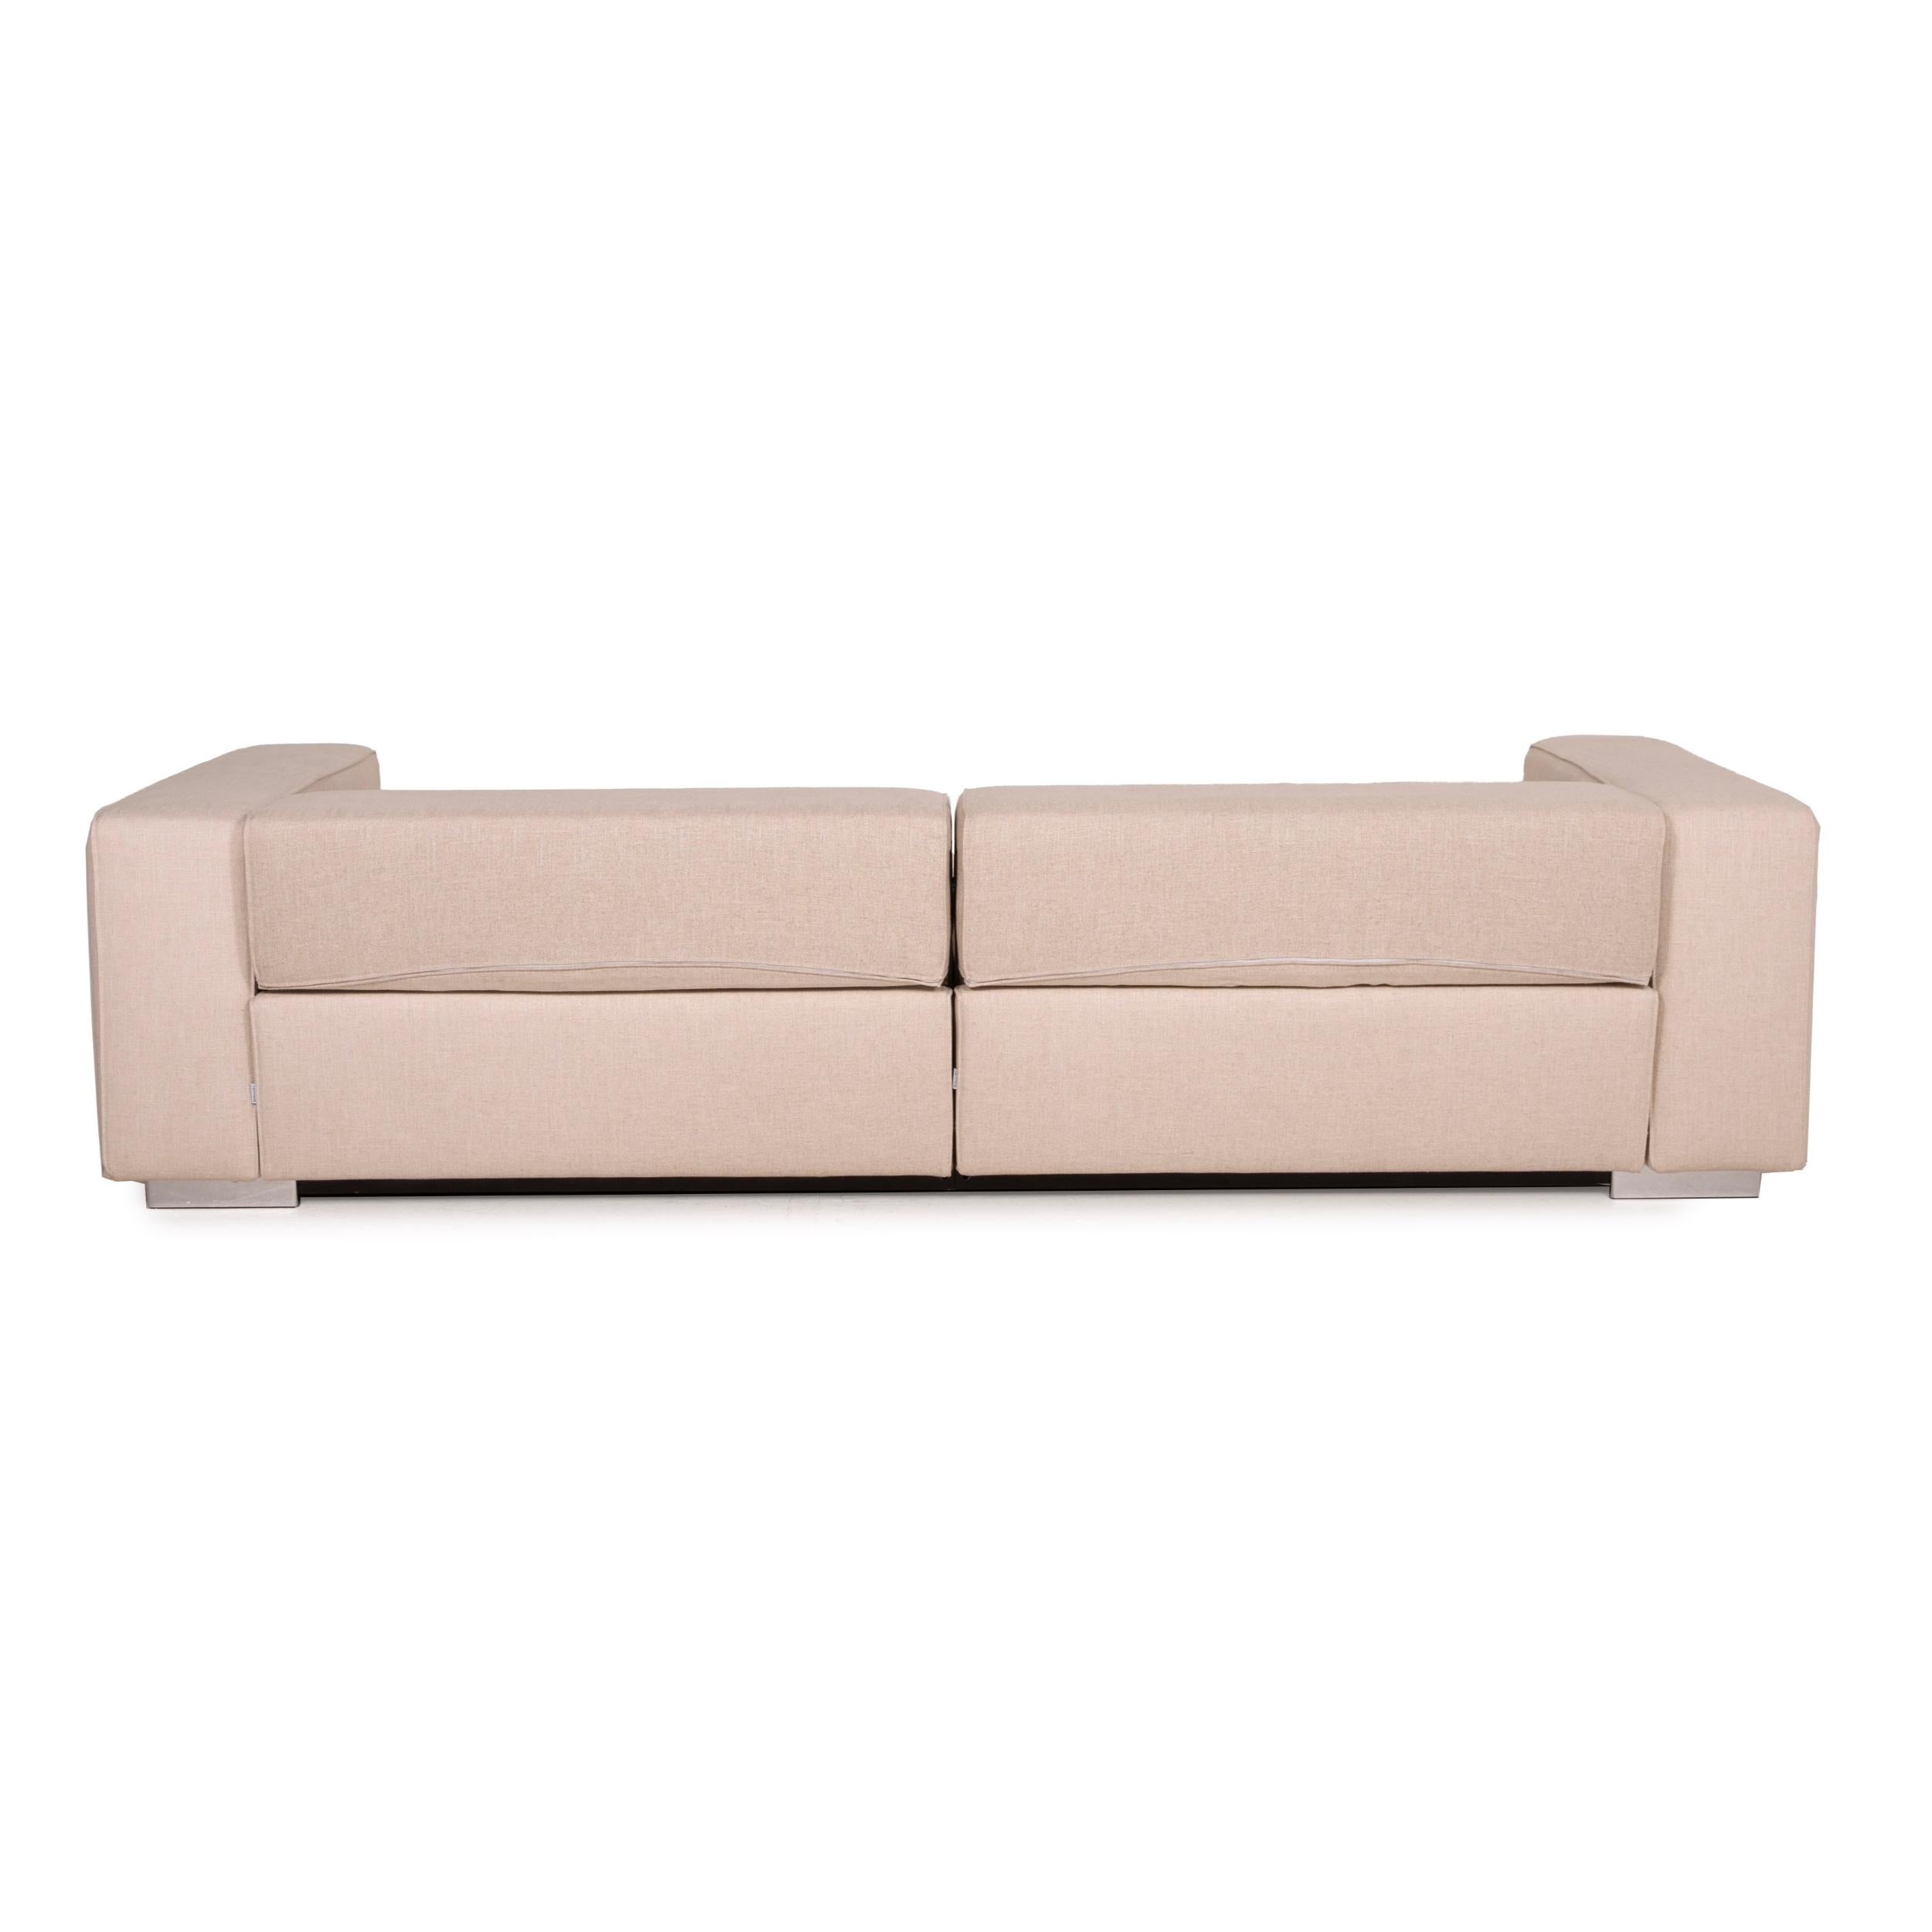 Molteni Turner Fabric Sofa Set Beige 1 Three-Seater 1 Two-Seater Function For Sale 11